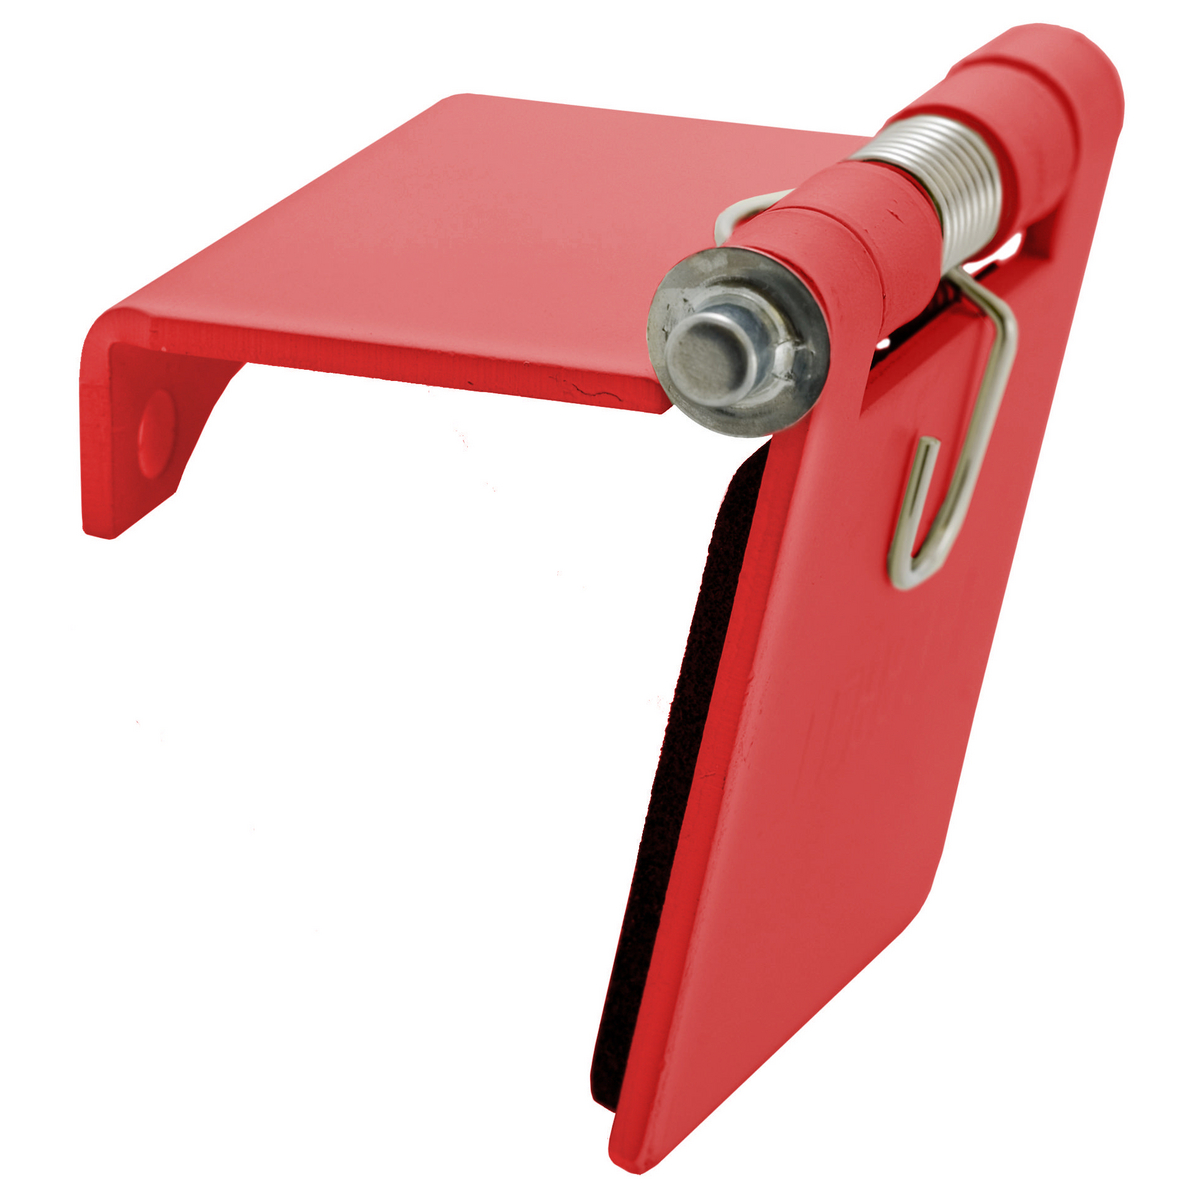 SINGLEPOLE, SNAP COVER, RED